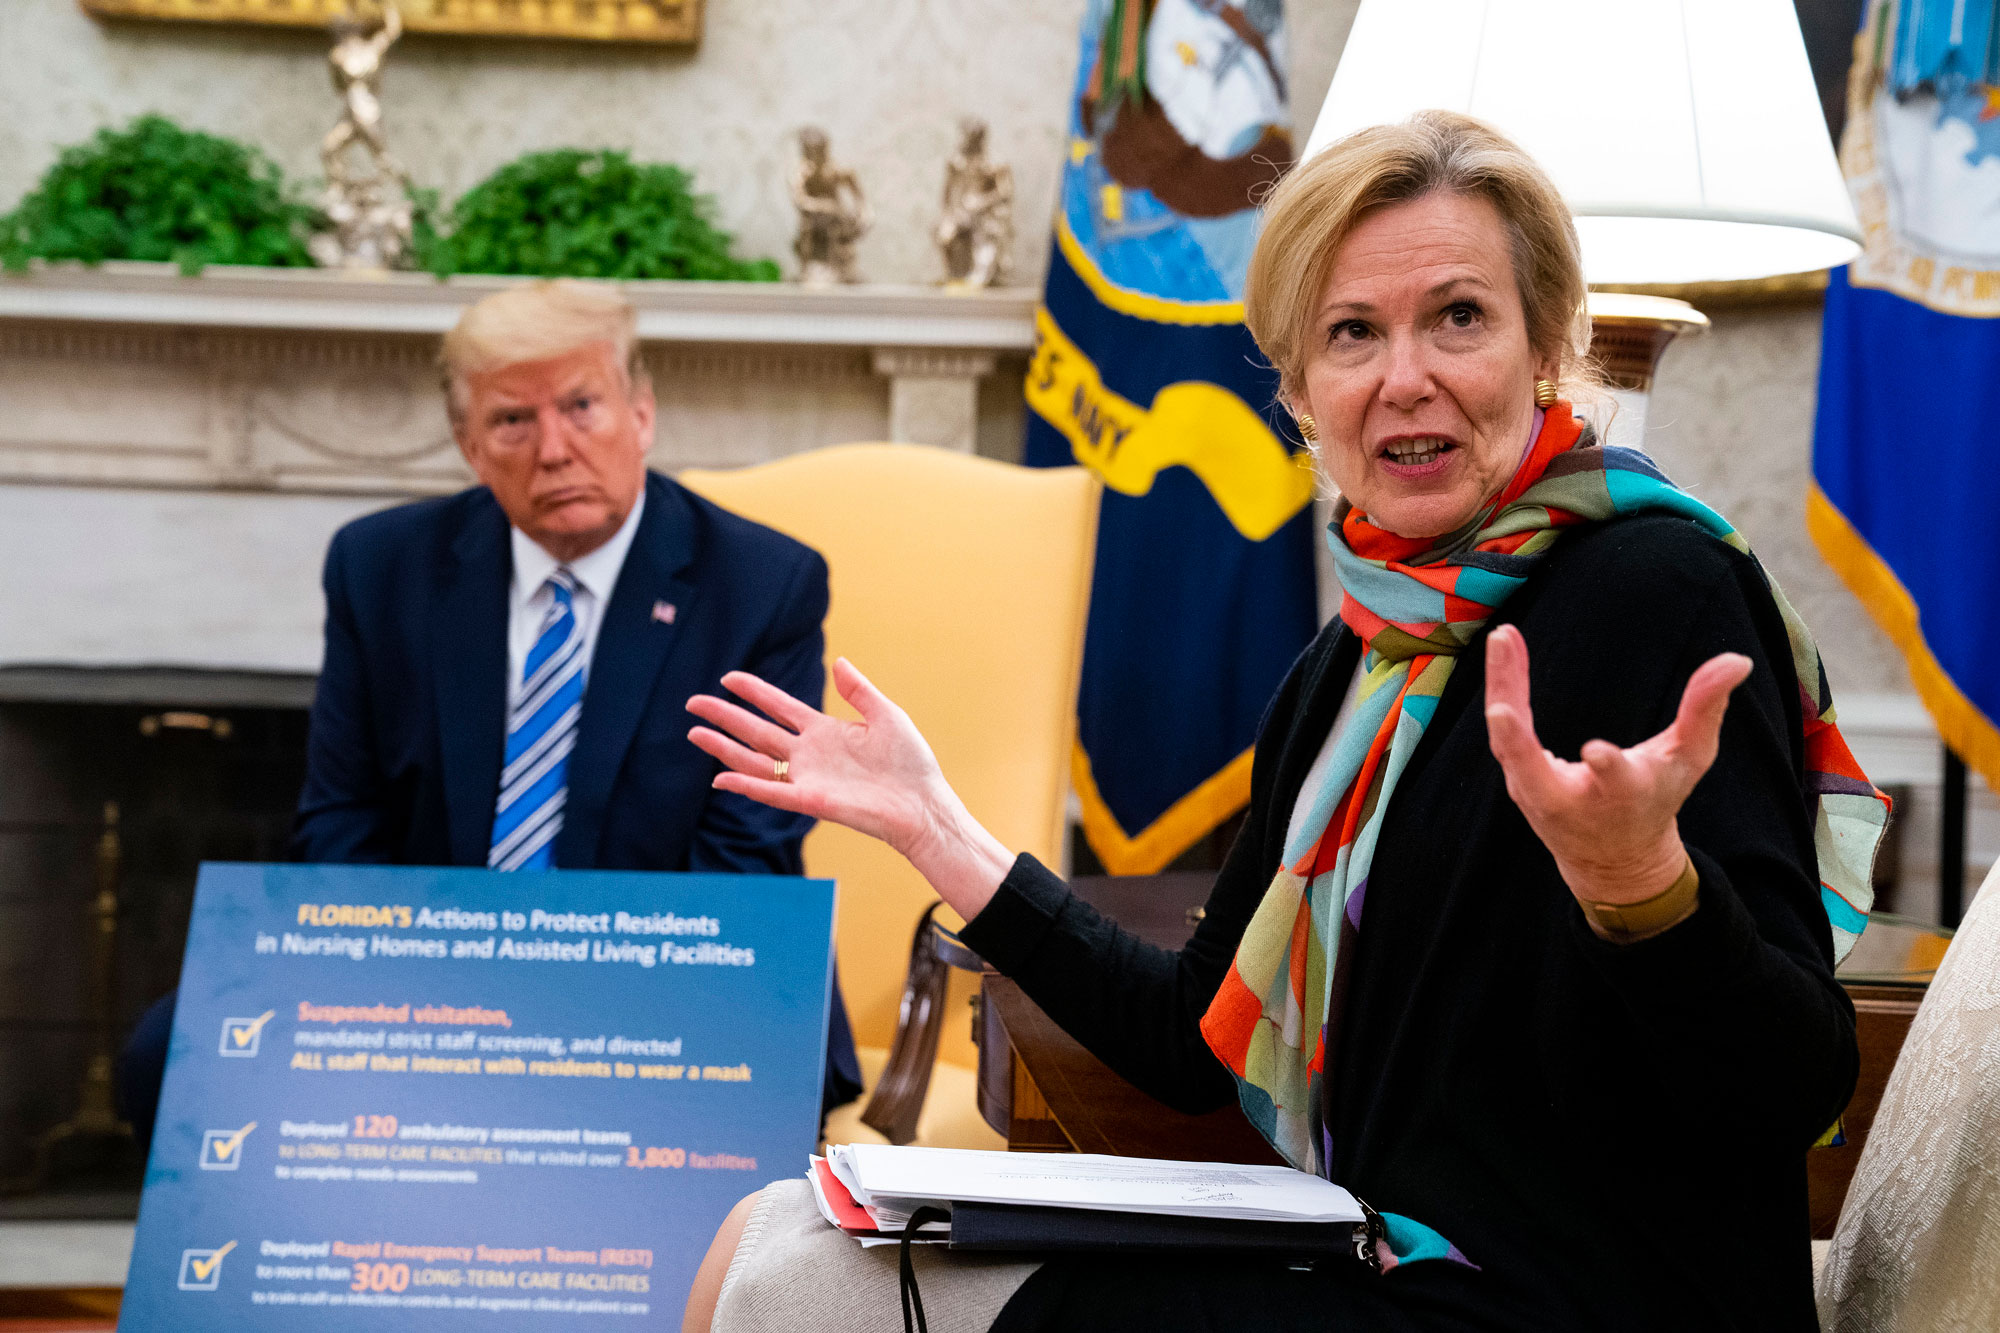 White House Coronavirus Task Force Coordinator Deborah Birx speaks during a meeting in the Oval Office of the White House on April 28, in Washington.